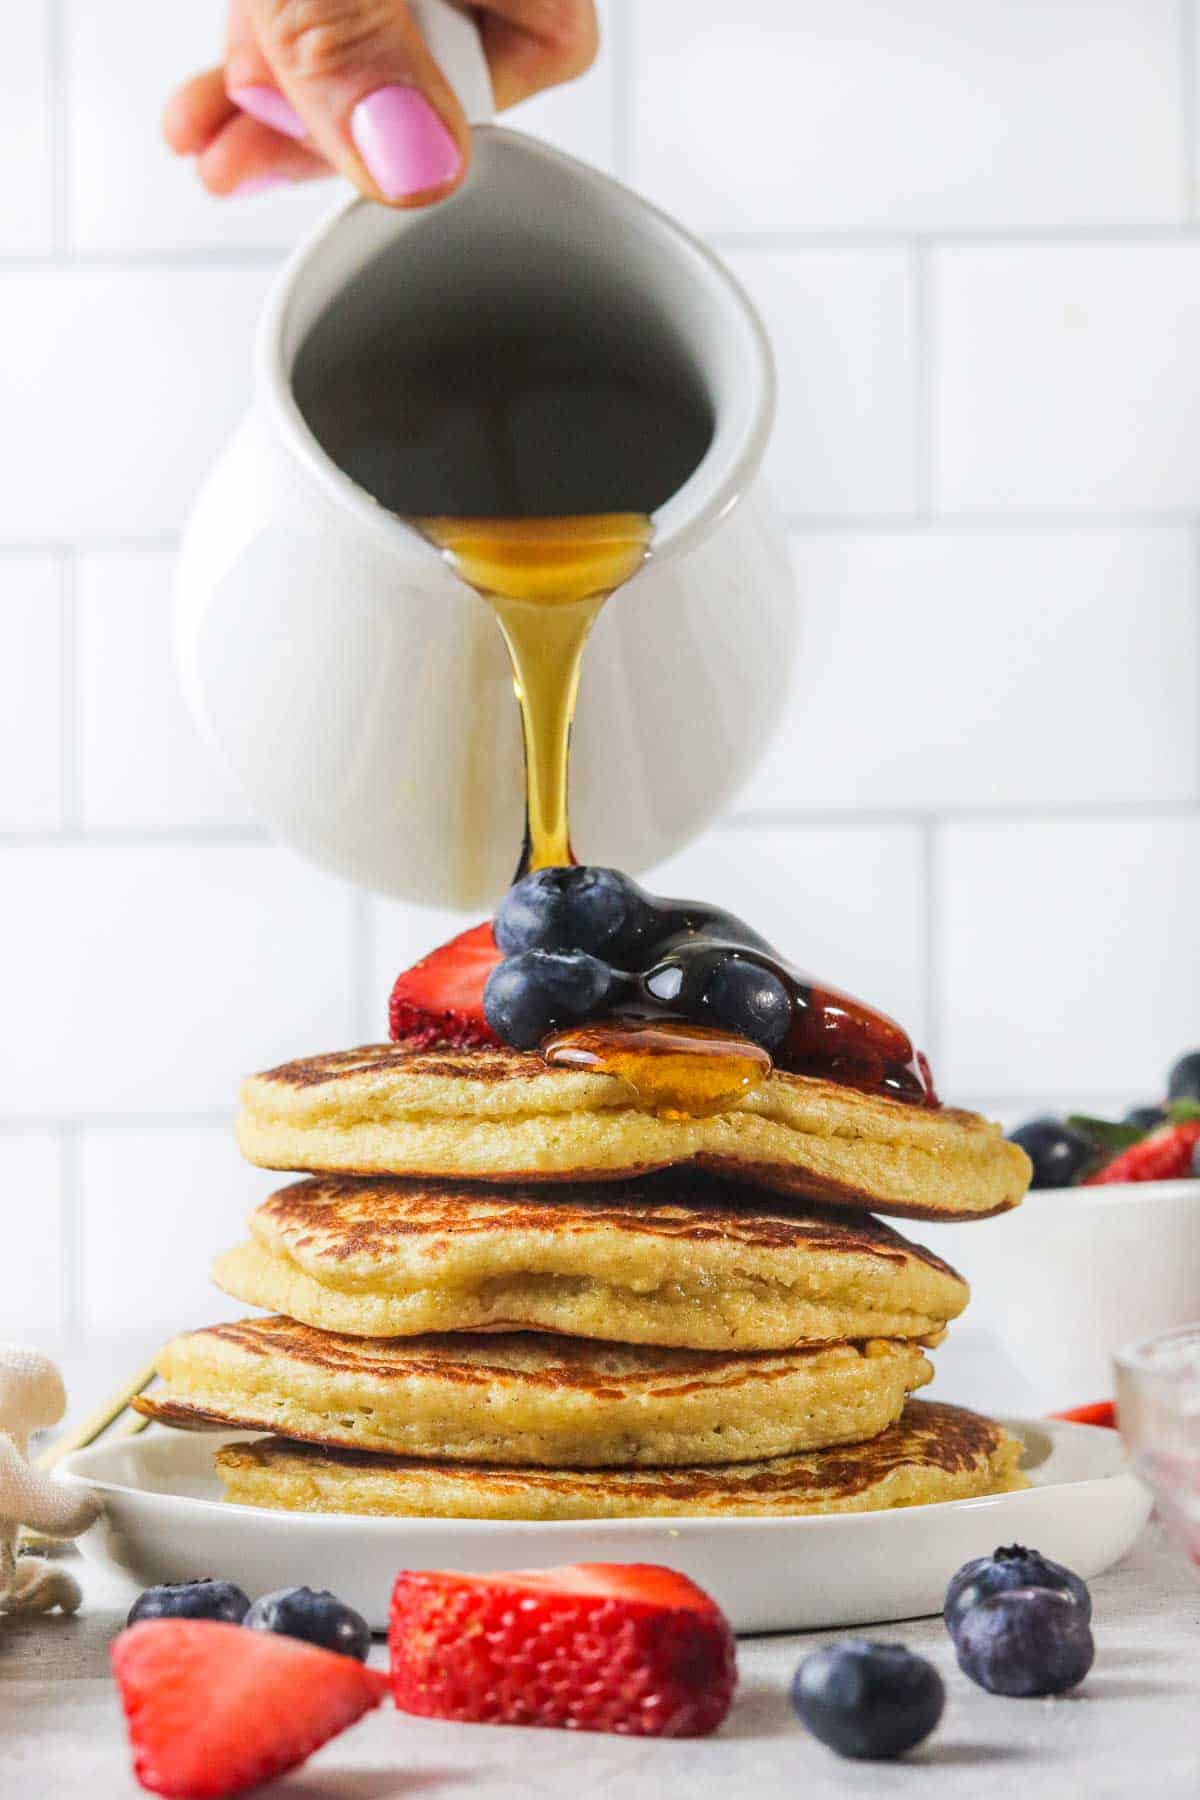 pouring syrup on protein pancakes without protein powder or banana.